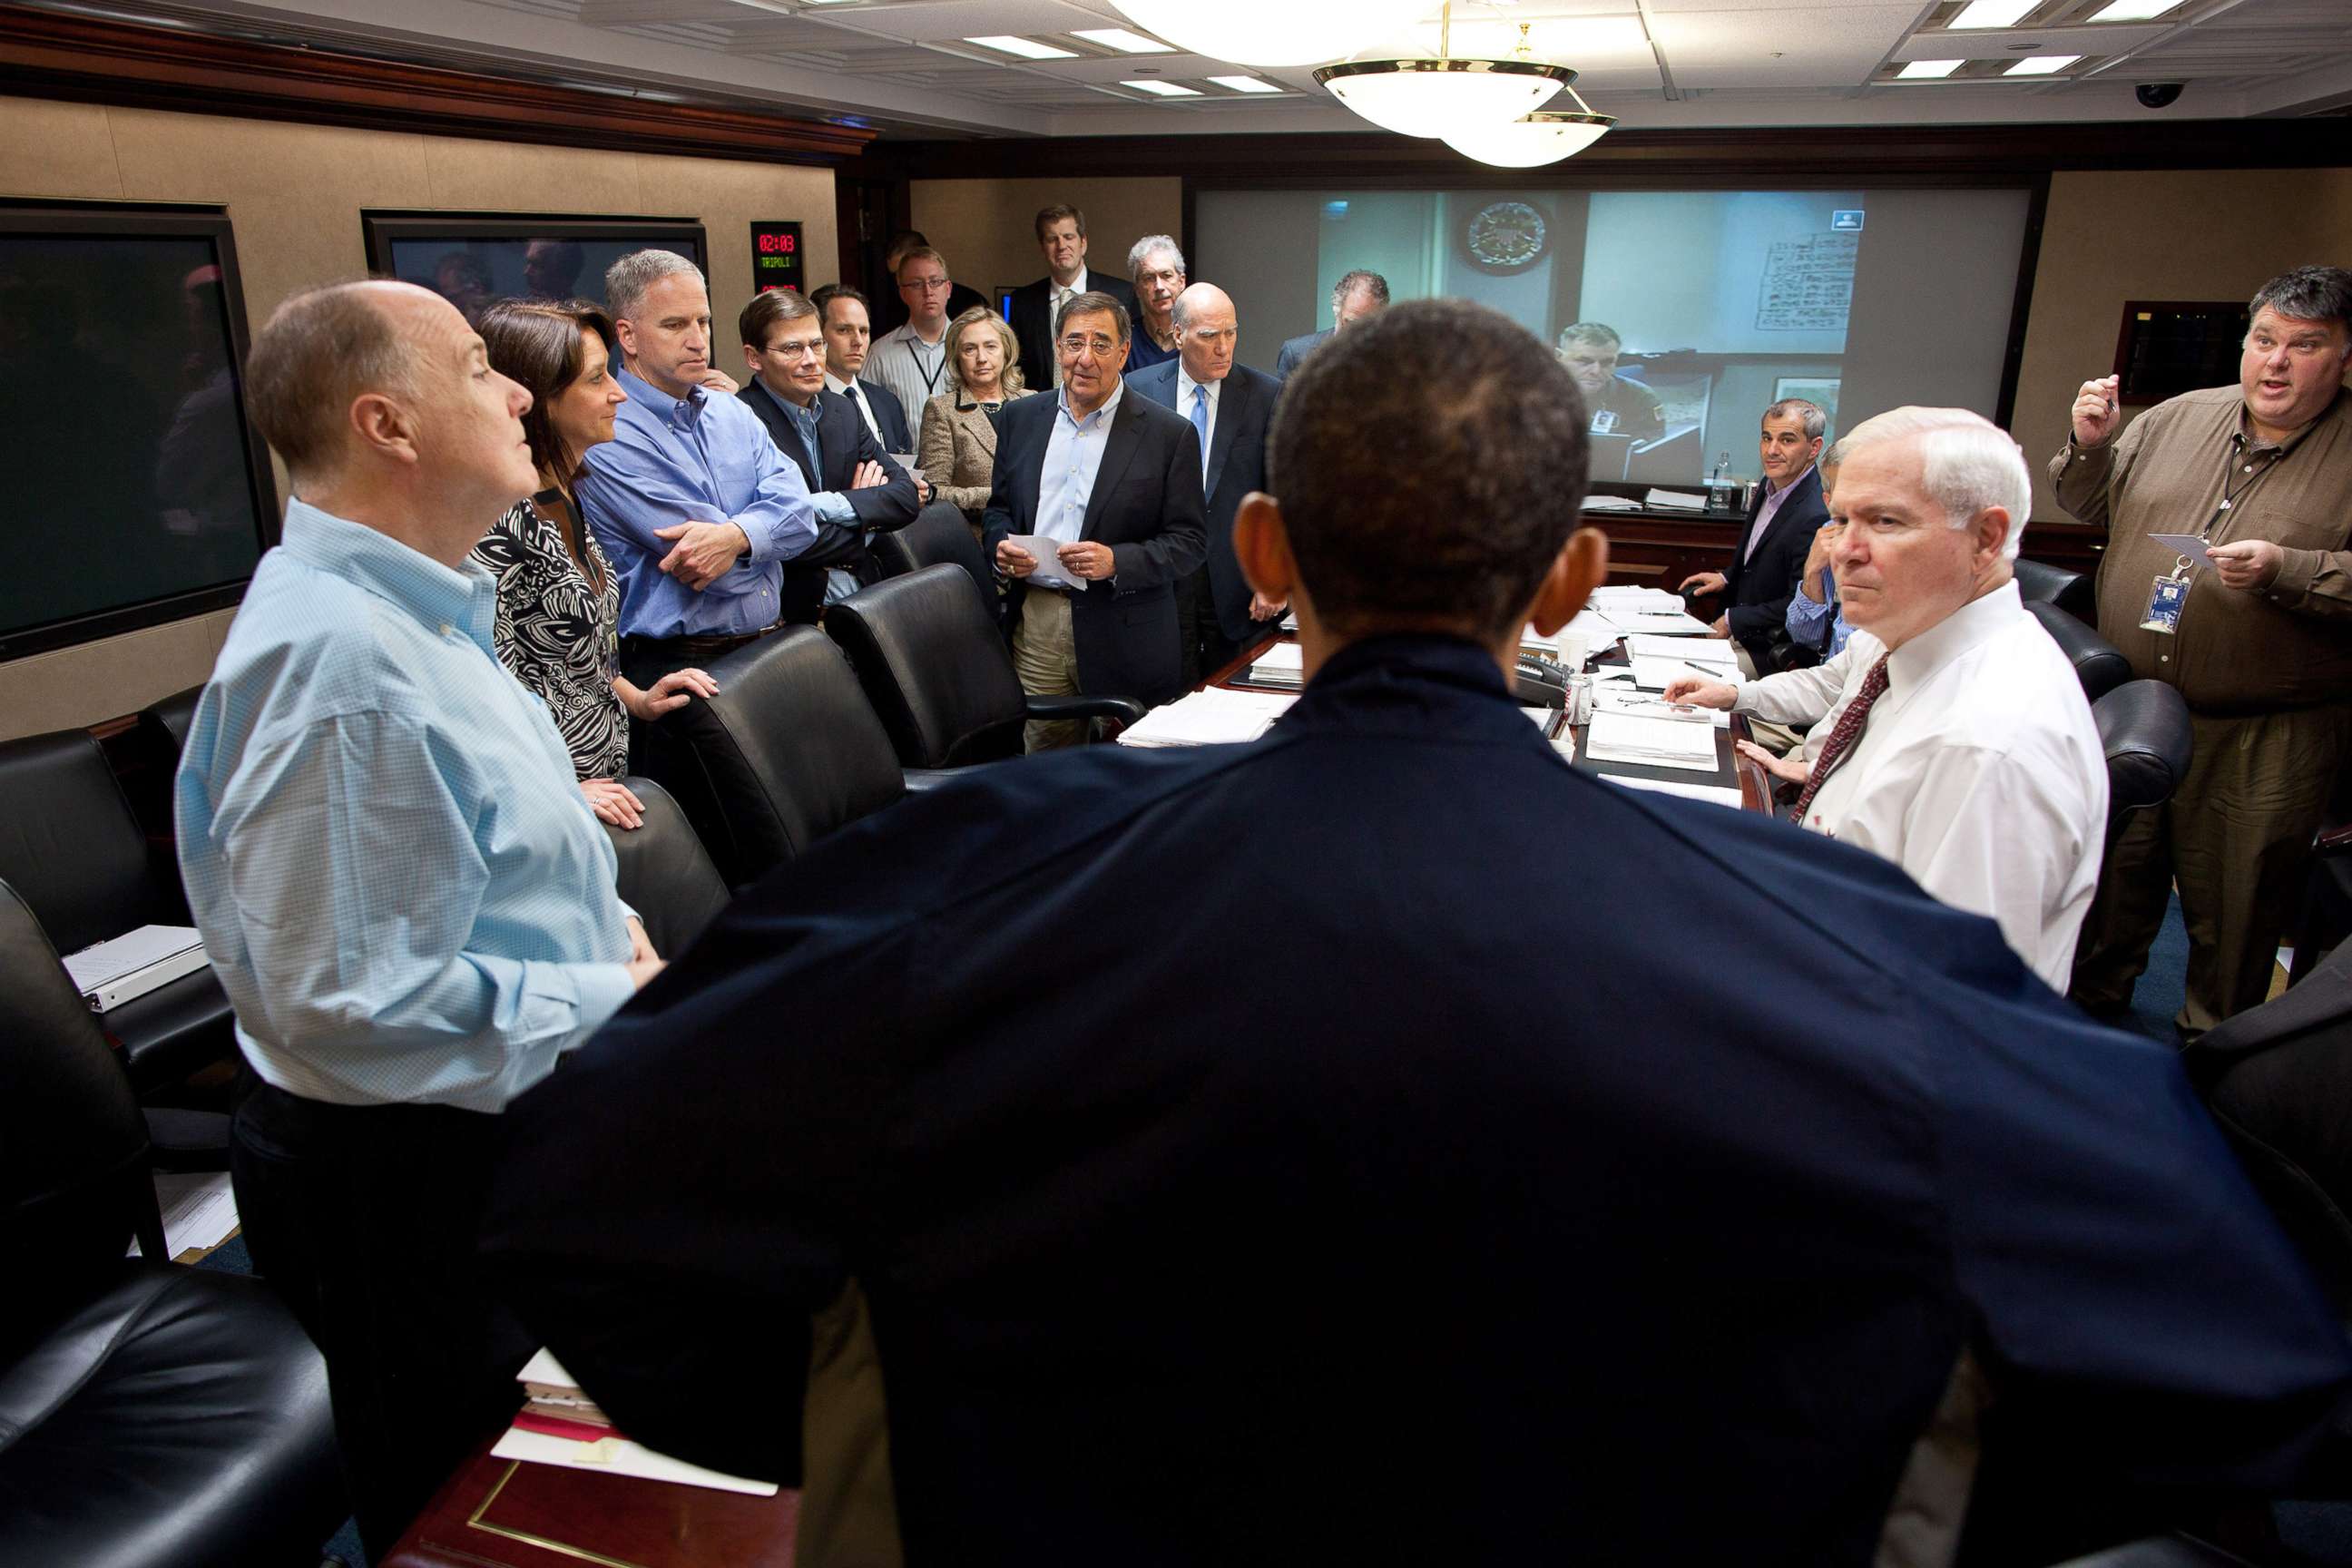 PHOTO: President Barack Obama talks with members of the national security team, including Leon Panetta, Director of the CIA, center, about the mission against Osama bin Laden, in the Situation Room of the White House, May 1, 2011 in Washington, D.C.